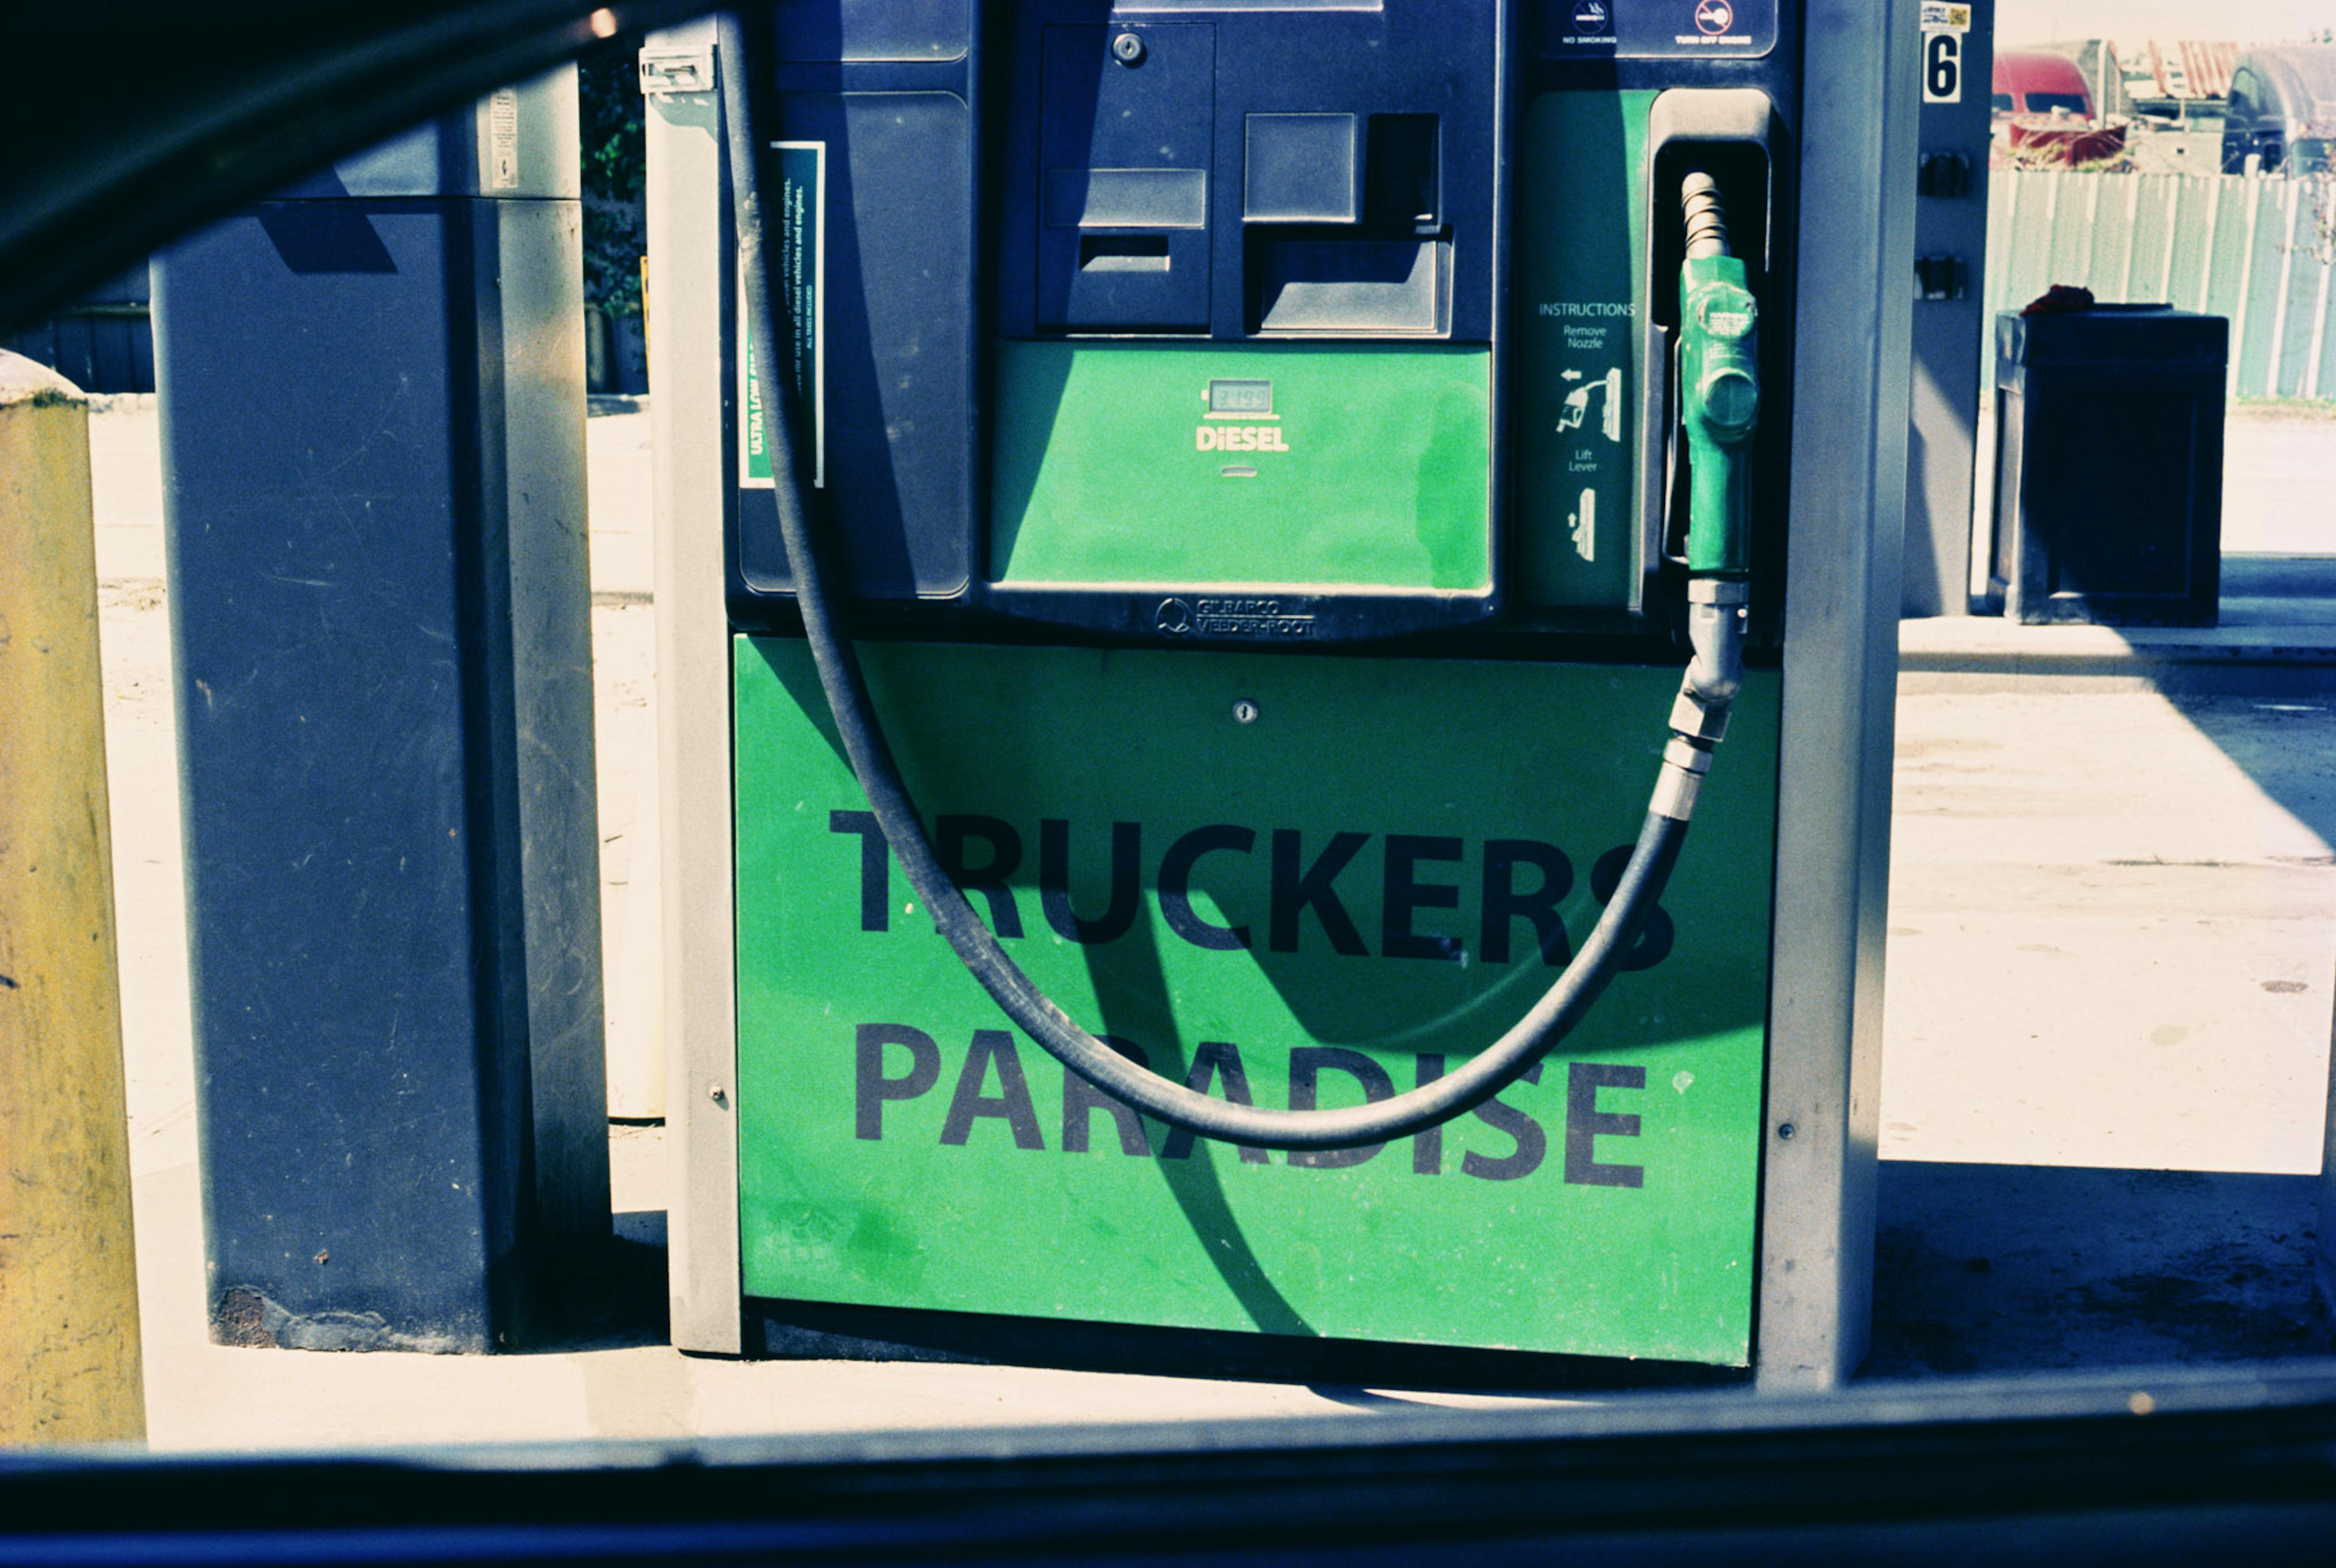 Mickey Aloisio Color Photograph - Untitled (Gas pump)